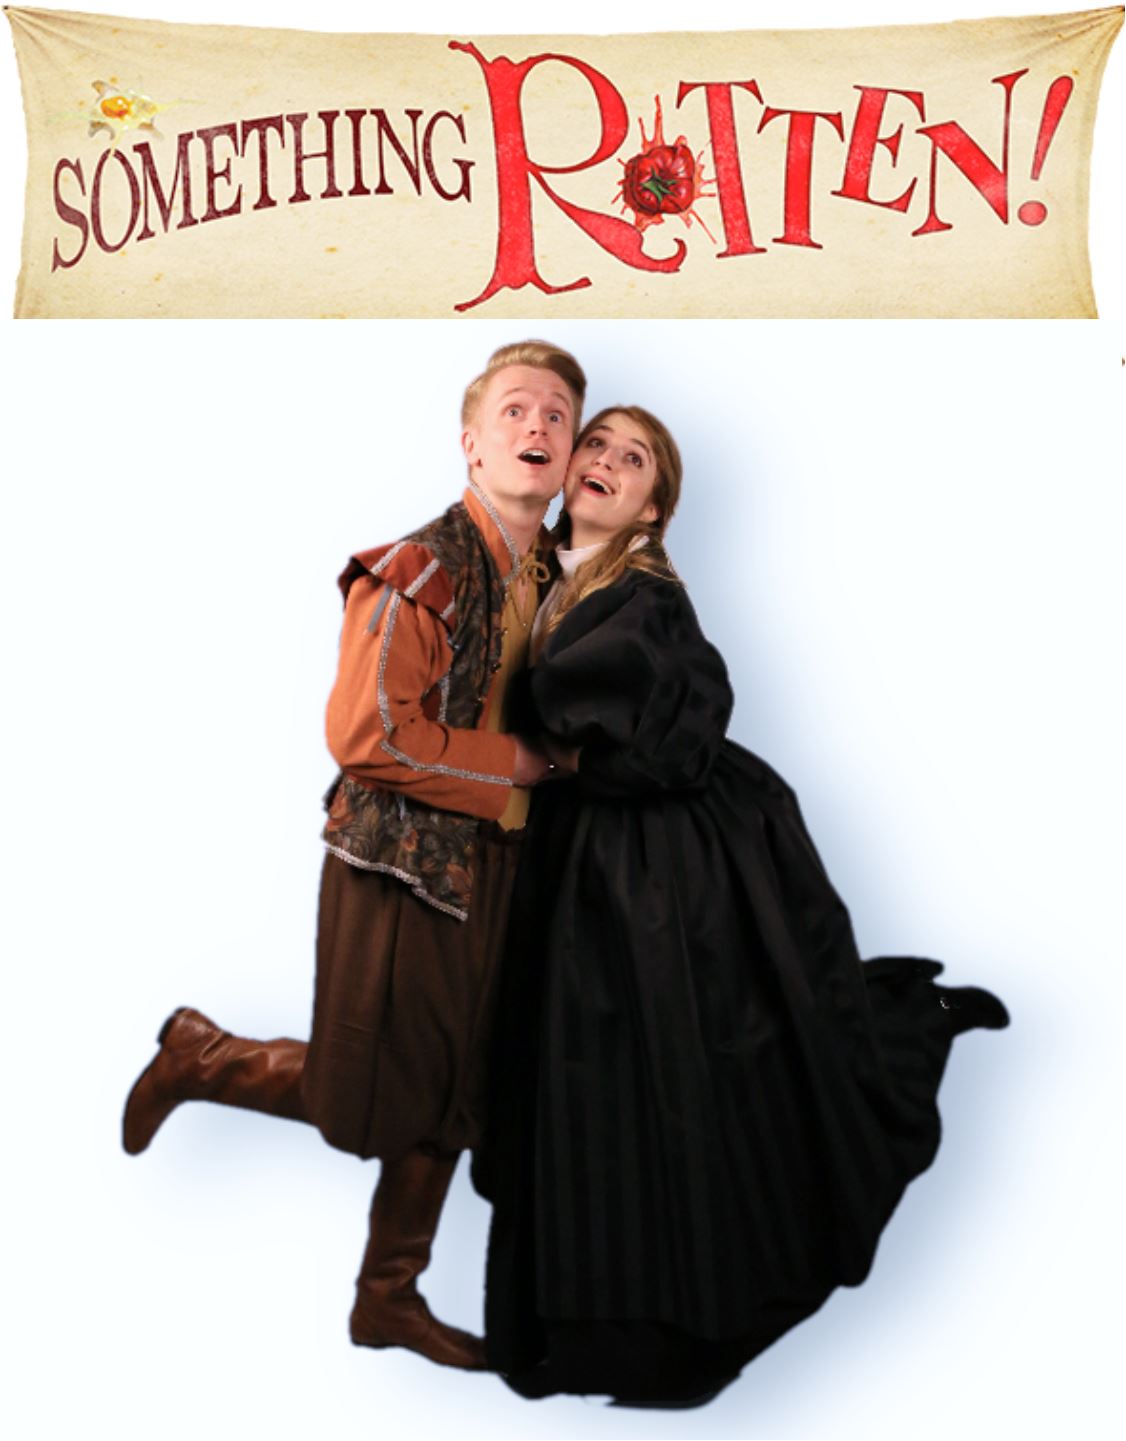 “Something Rotten!” presented by Theatre Nebula featuring (left to right) Joe Lewis (Nigel Bottom) and Mary Margaret McCormick (Portia).